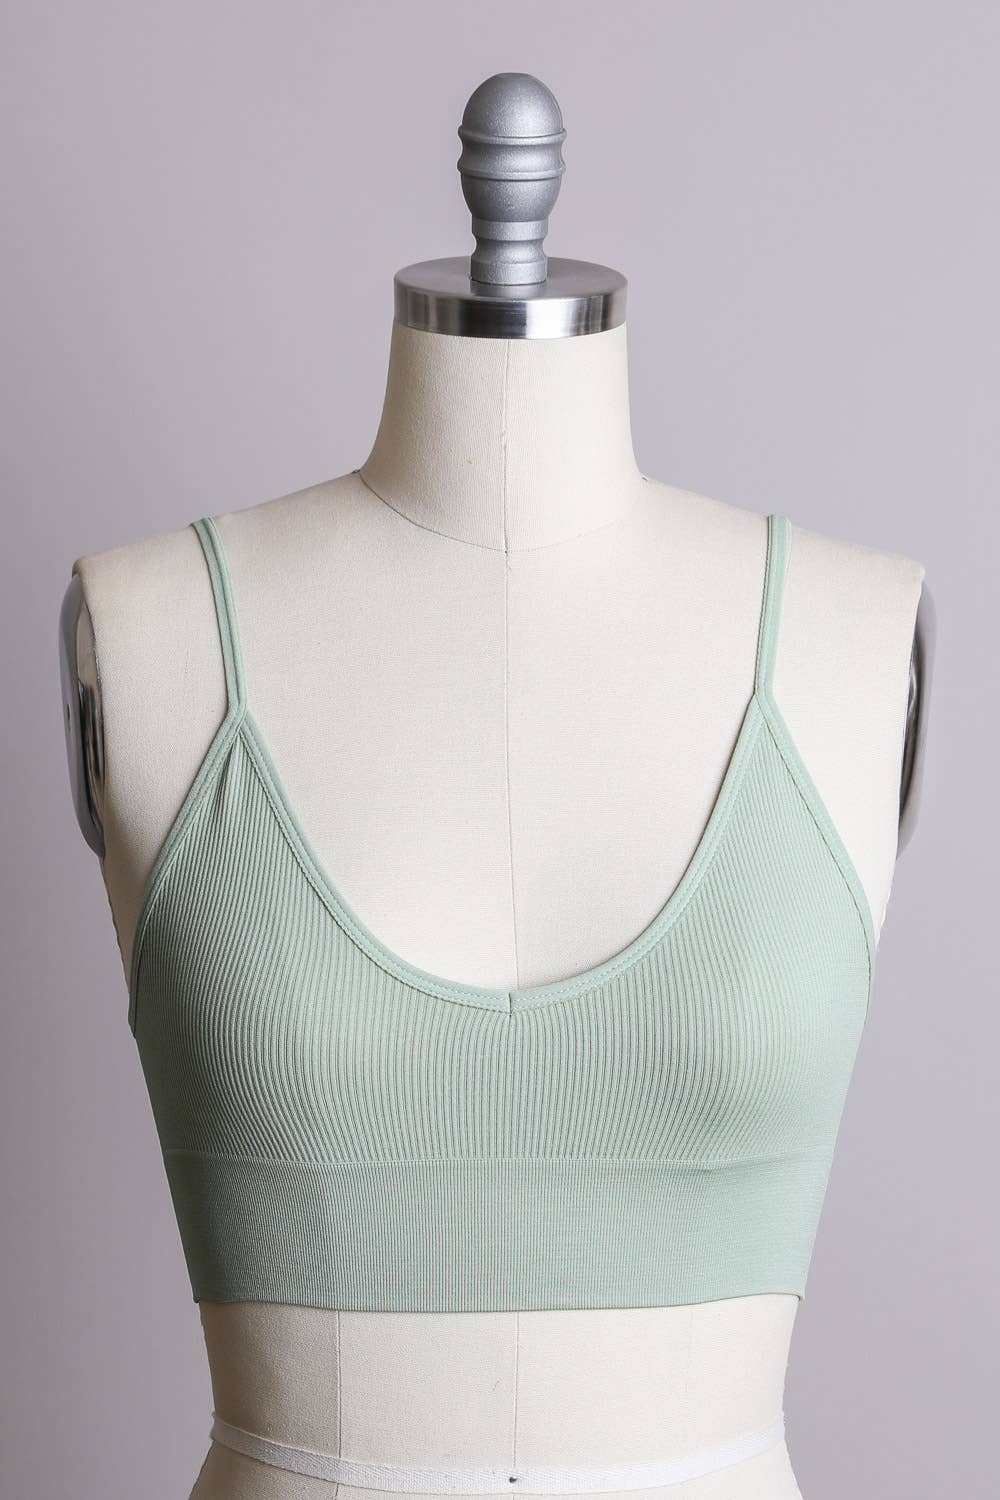 Leto Accessories - Low Back Seamless Bralette - Sage